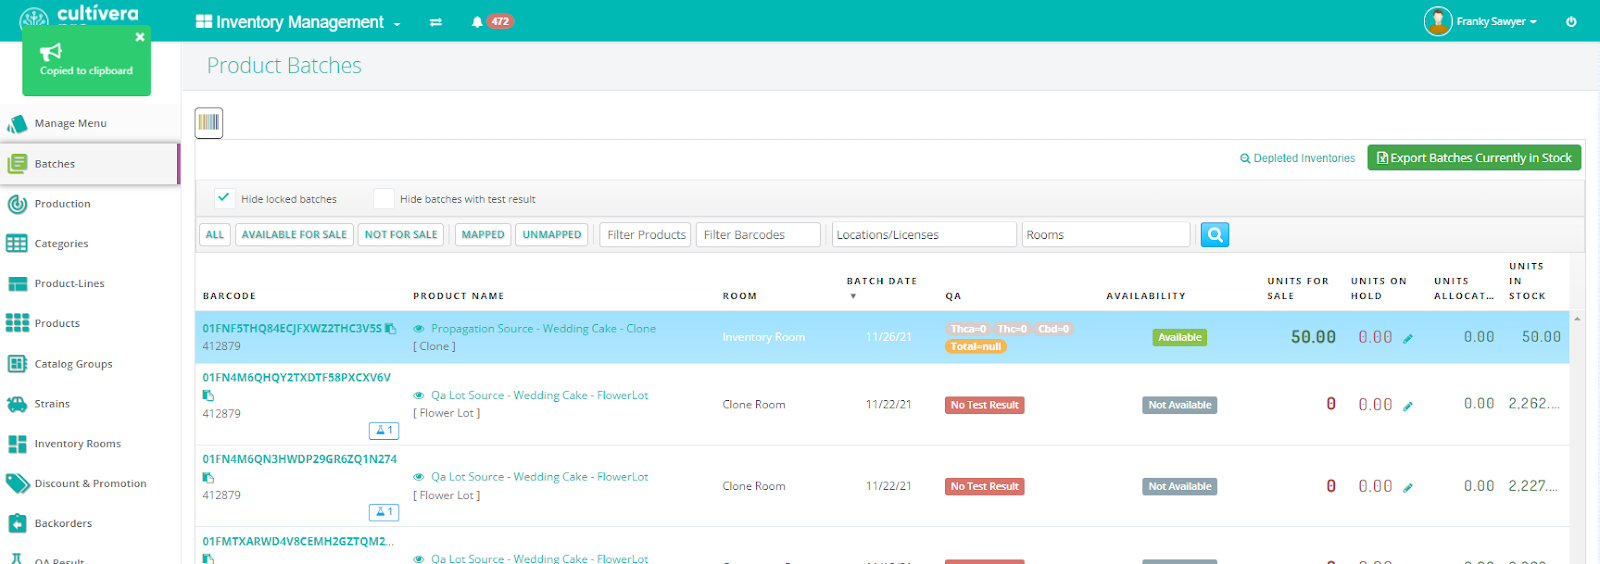 Inventory Management module Product Batches page with notification